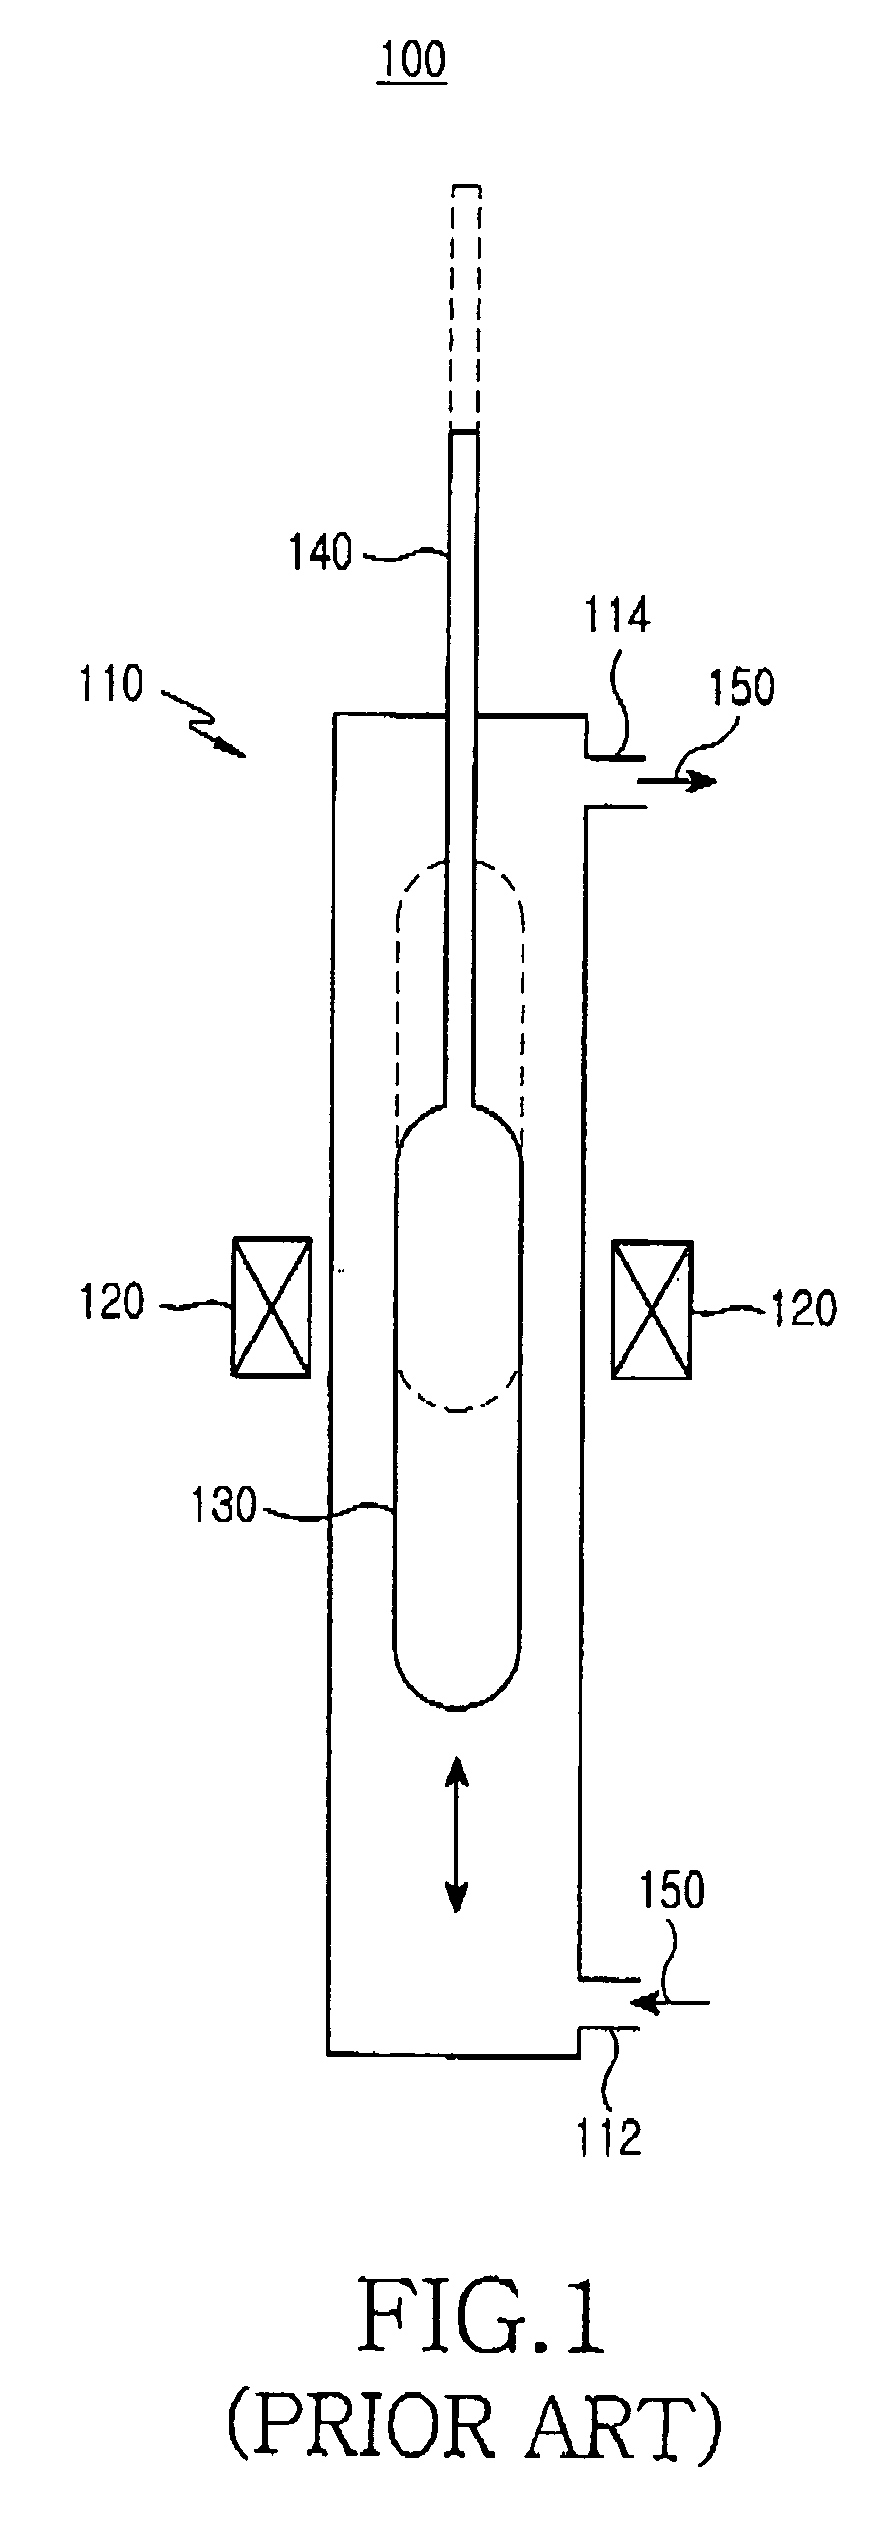 Method for dehydrating and consolidating a porous optical fiber preform